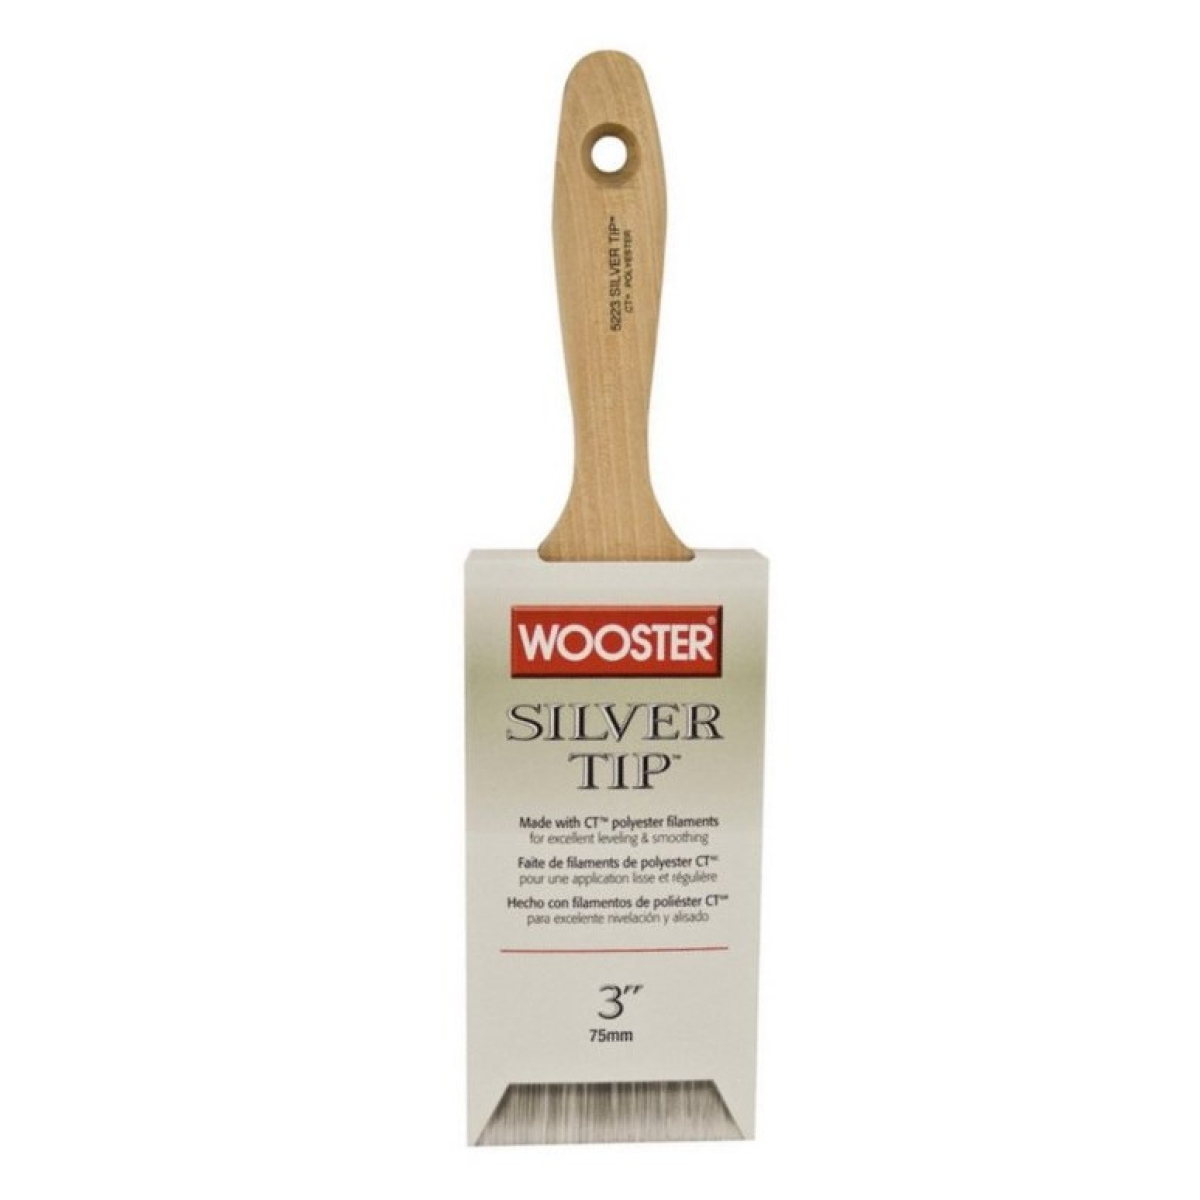 Wooster Silver Tip Paint Brush